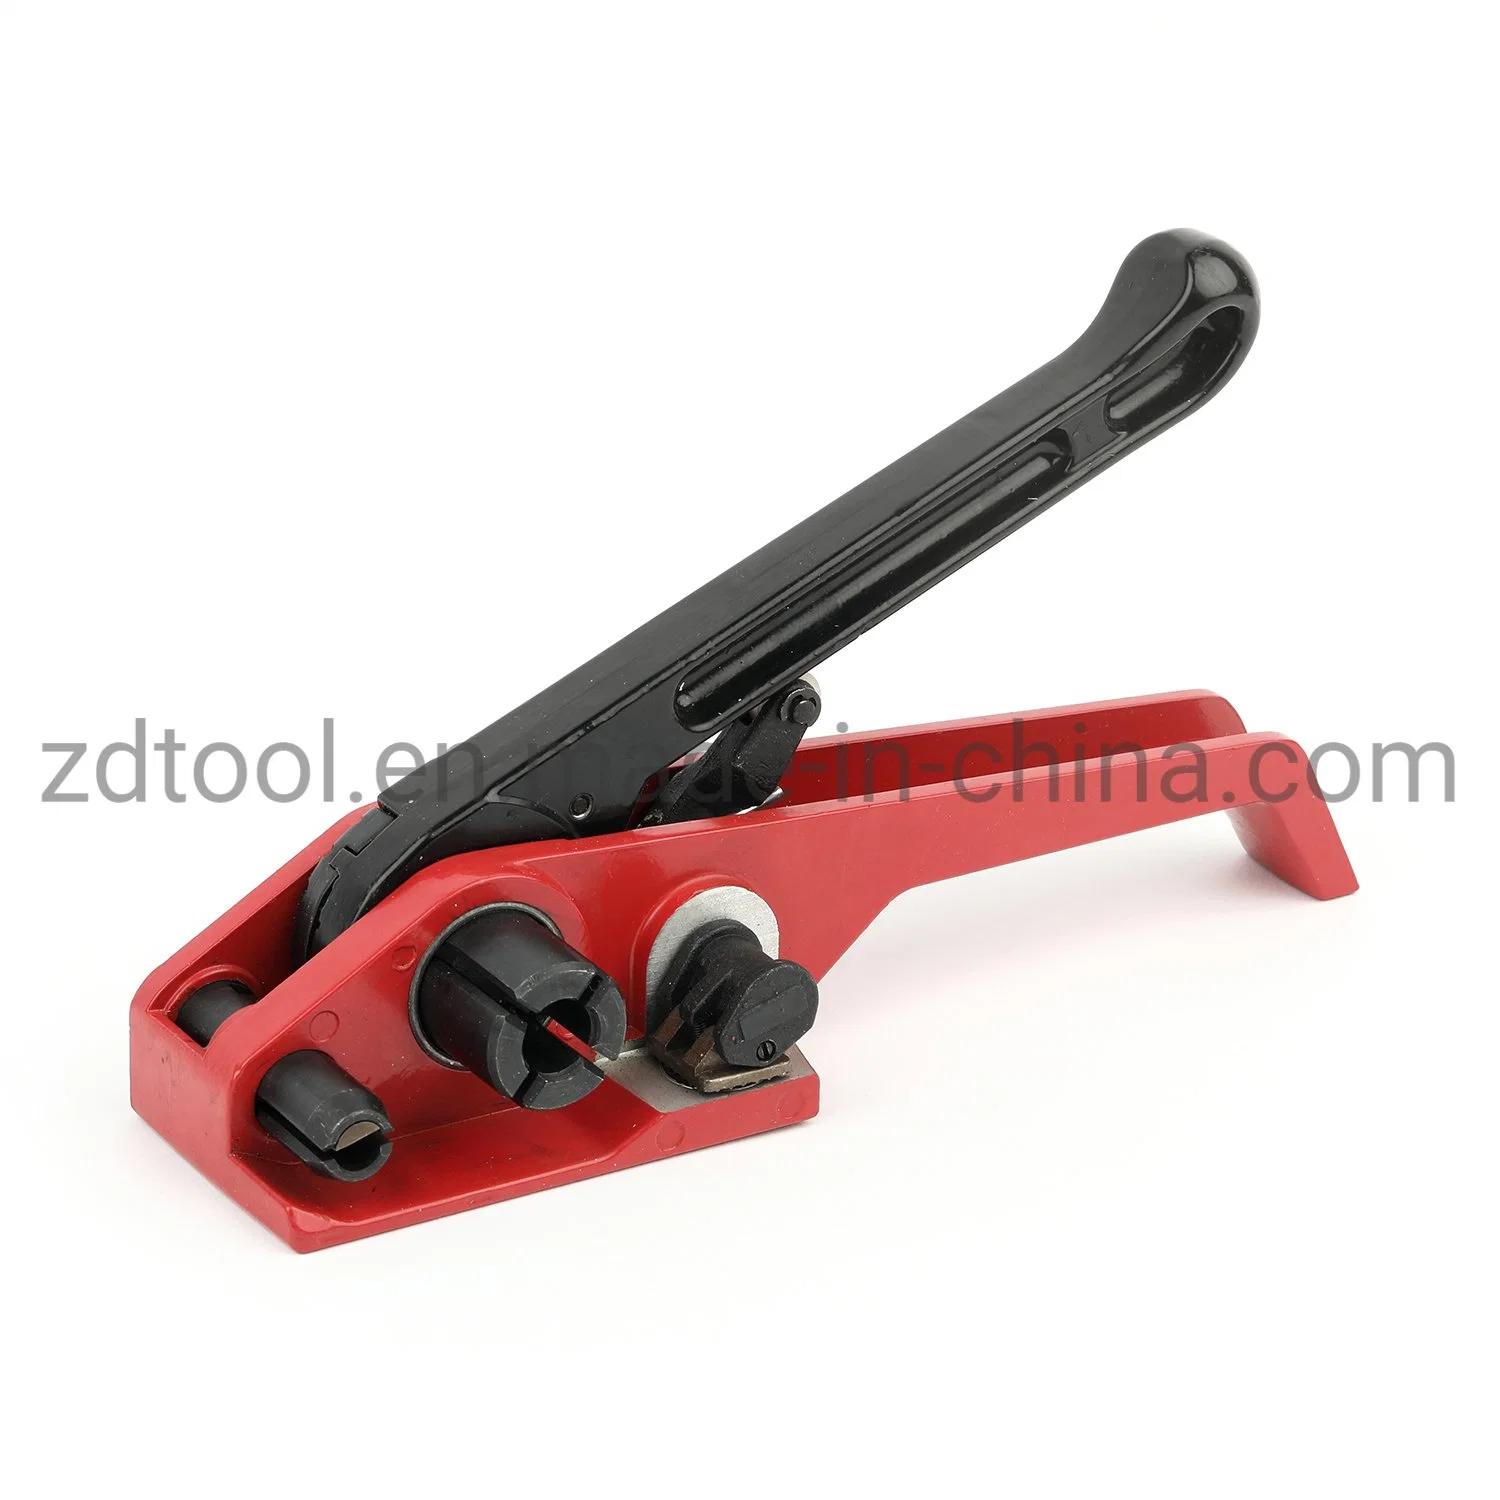 Small Machine Strap Tensioner 13-19mm Manual Strapping Tool H21